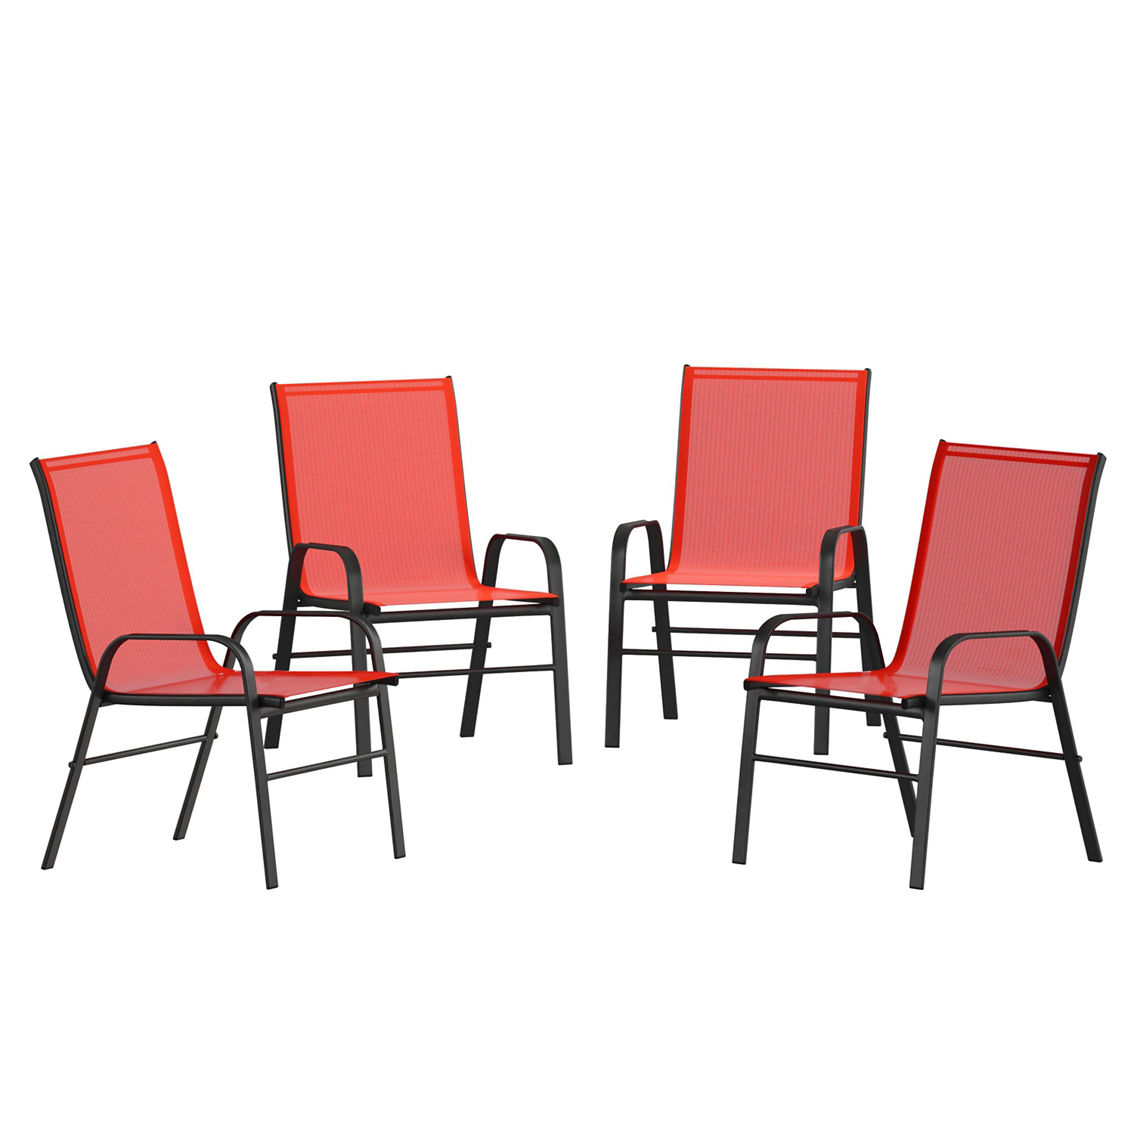 Flash Furniture 4 Pack Outdoor Stack Chair w/ Flex Material - Image 5 of 5